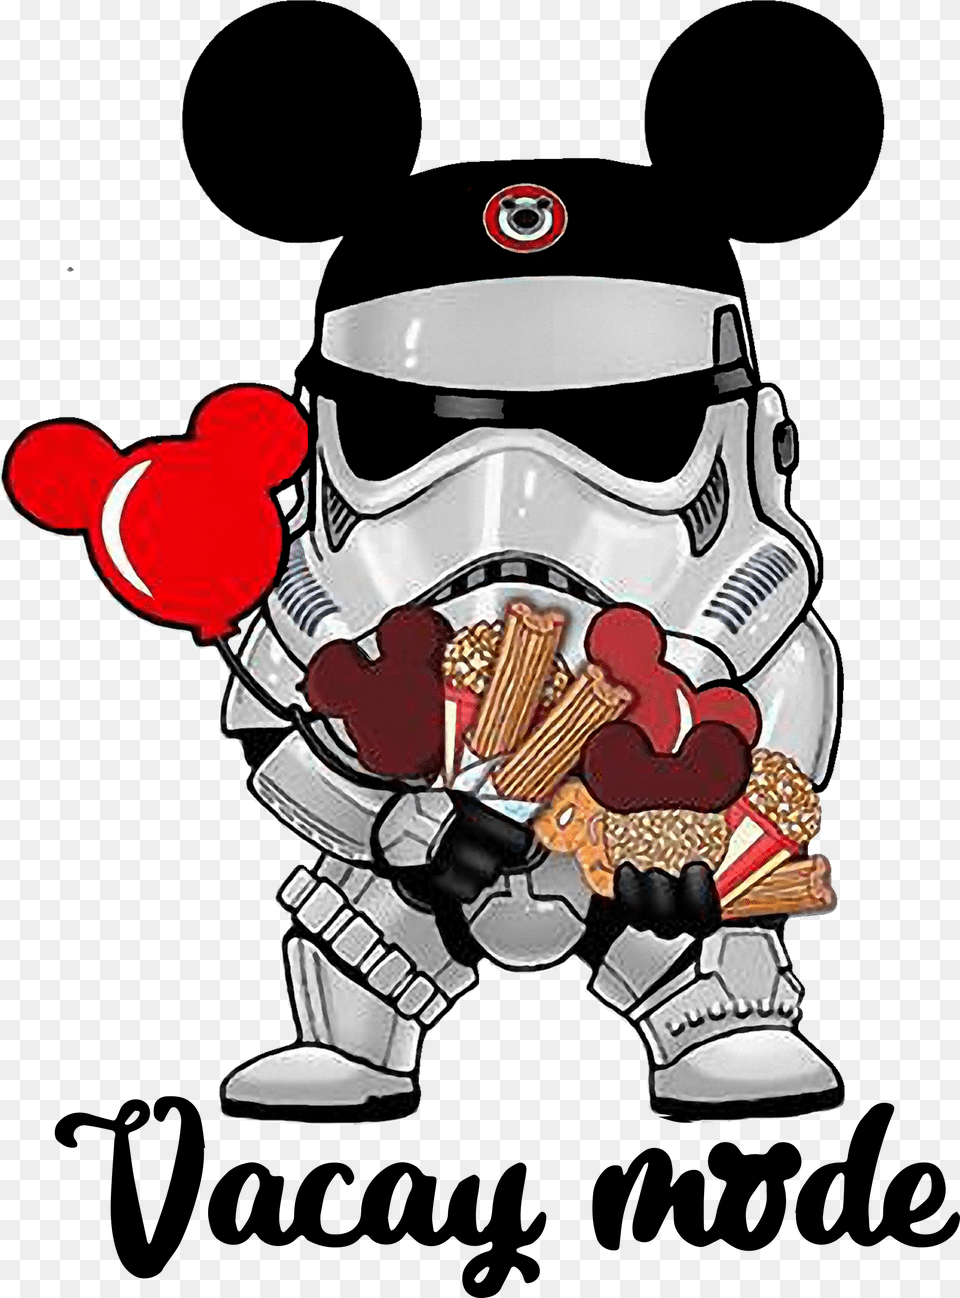 Star Wars Stormtrooper Micky Vacay Mode Star Wars Stormtrooper Chibi Free Png Download